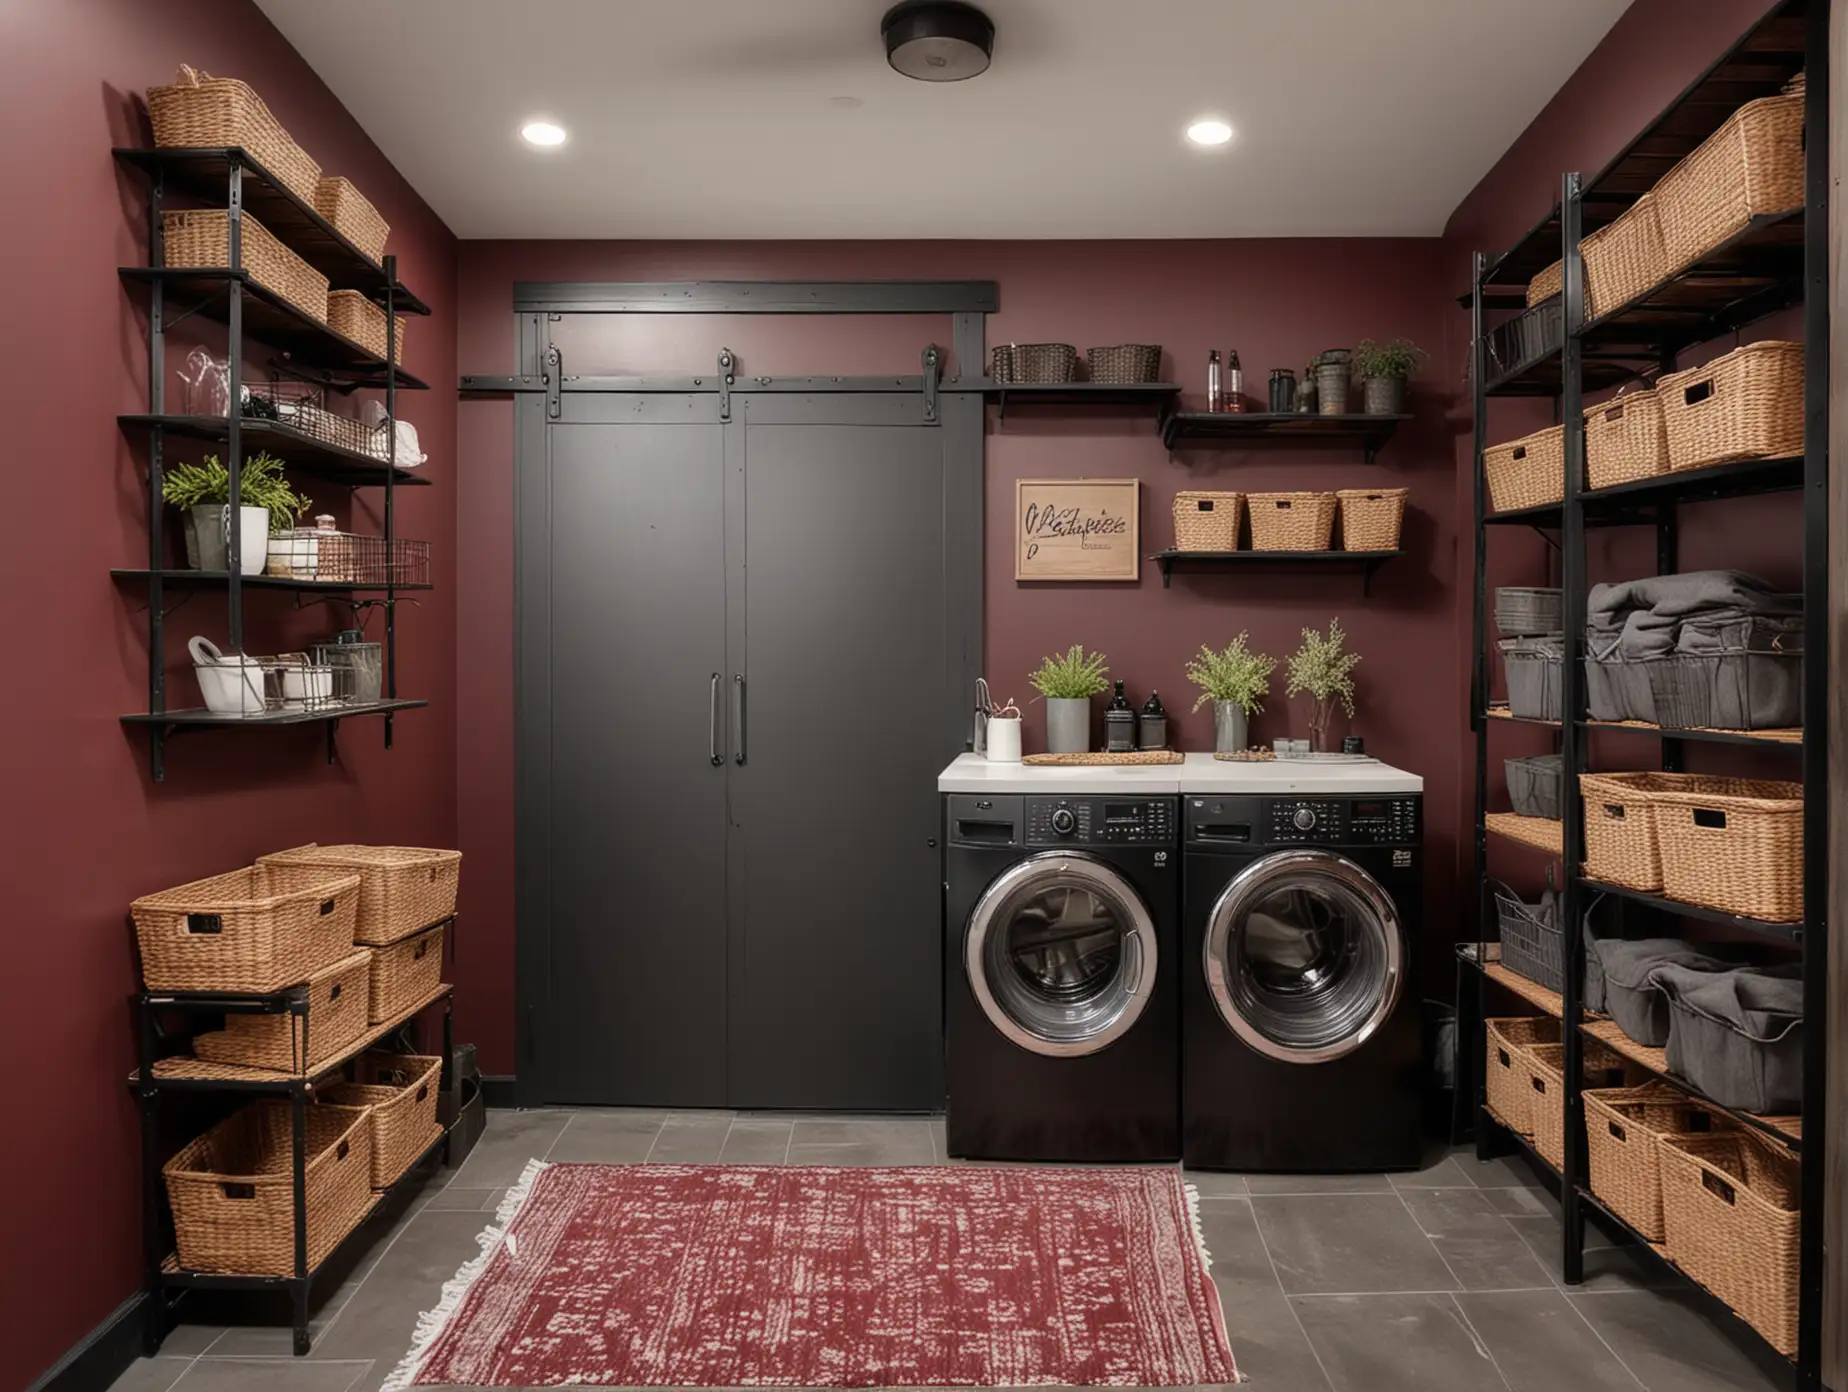 Modern-Laundry-Room-with-Burgundy-Accent-Walls-and-Industrial-Shelving